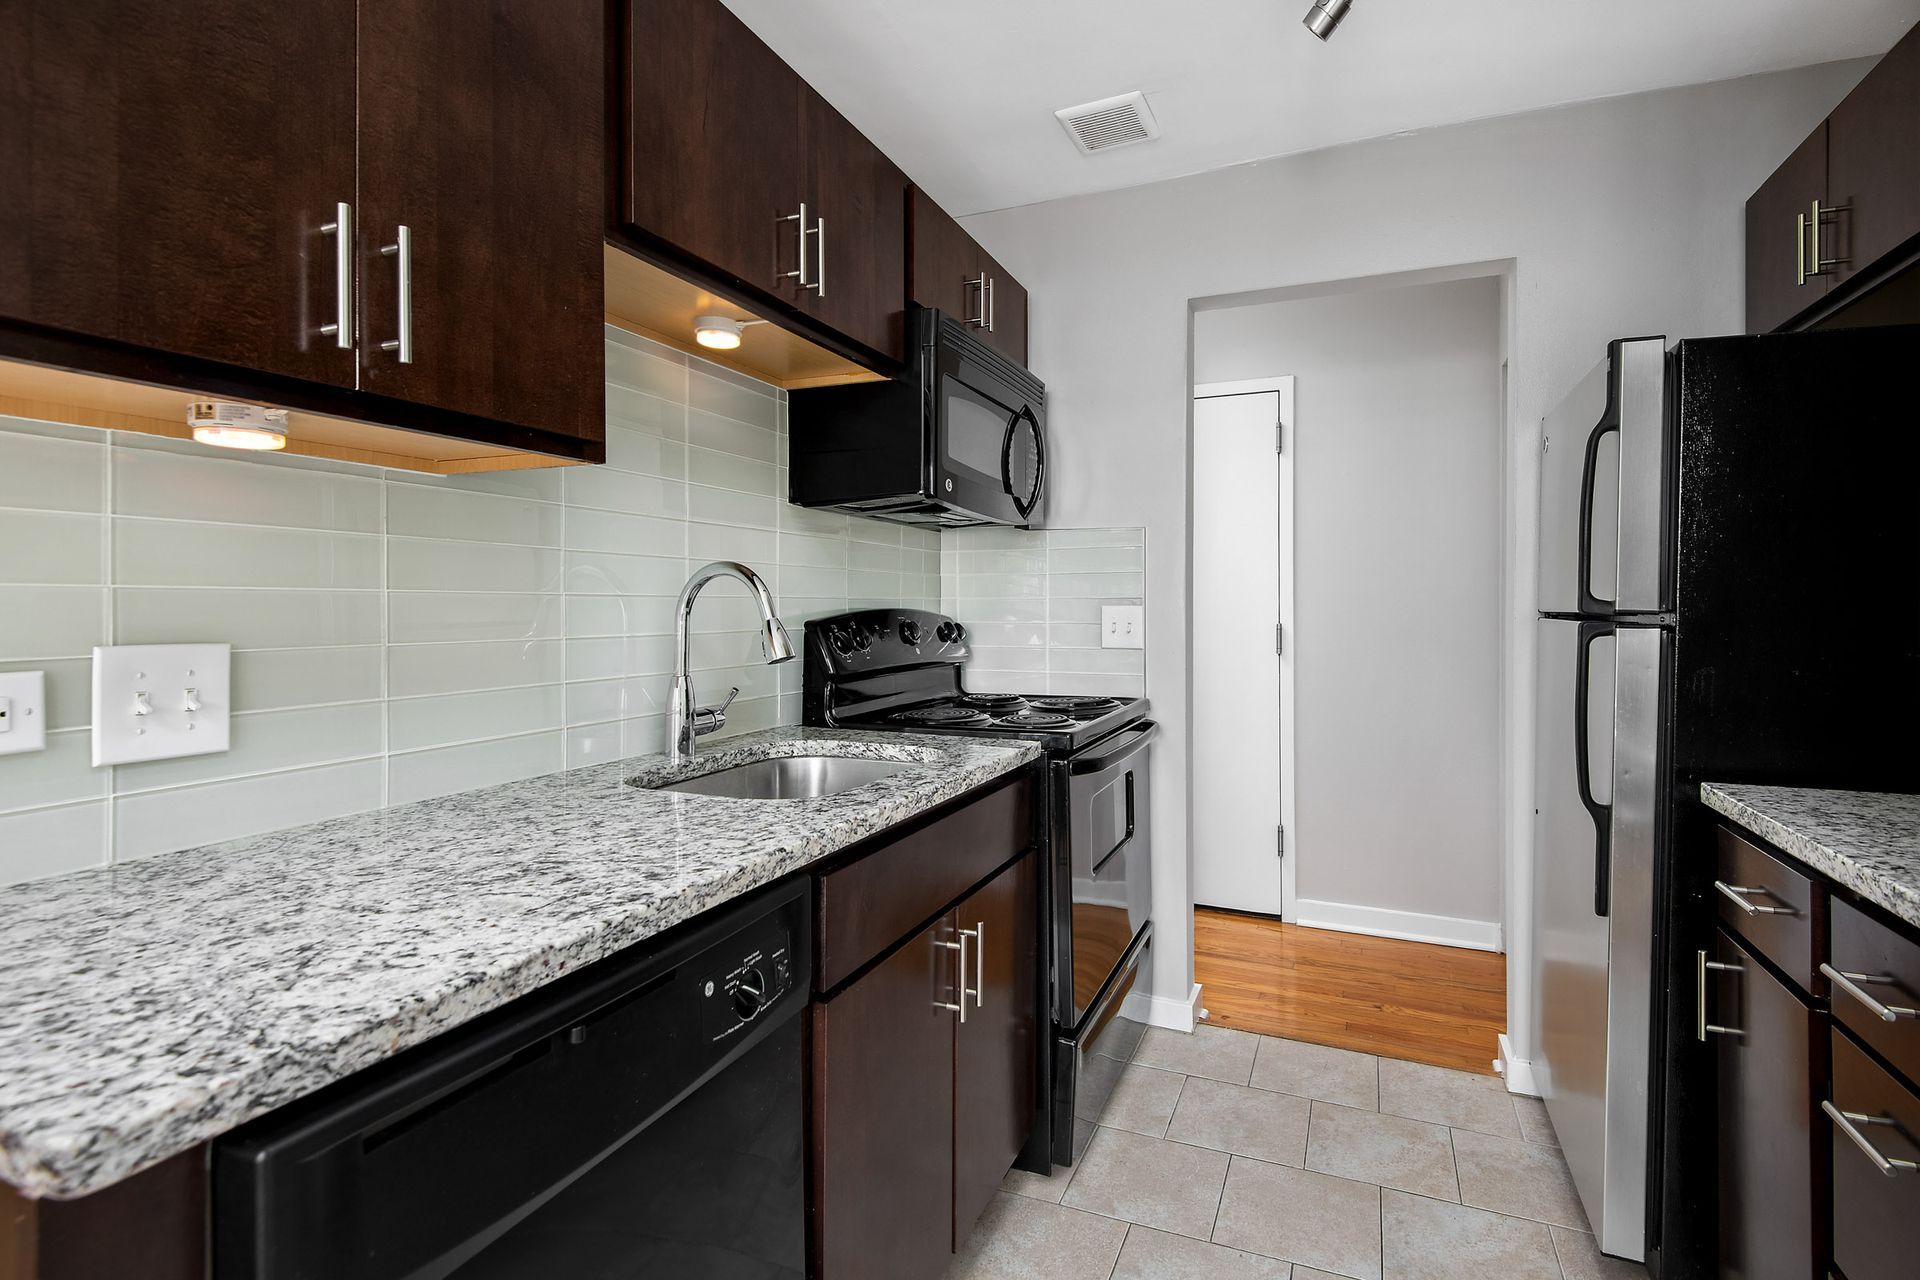 A kitchen with granite counter tops, stainless steel appliances, and black cabinets at Reside at 2727.